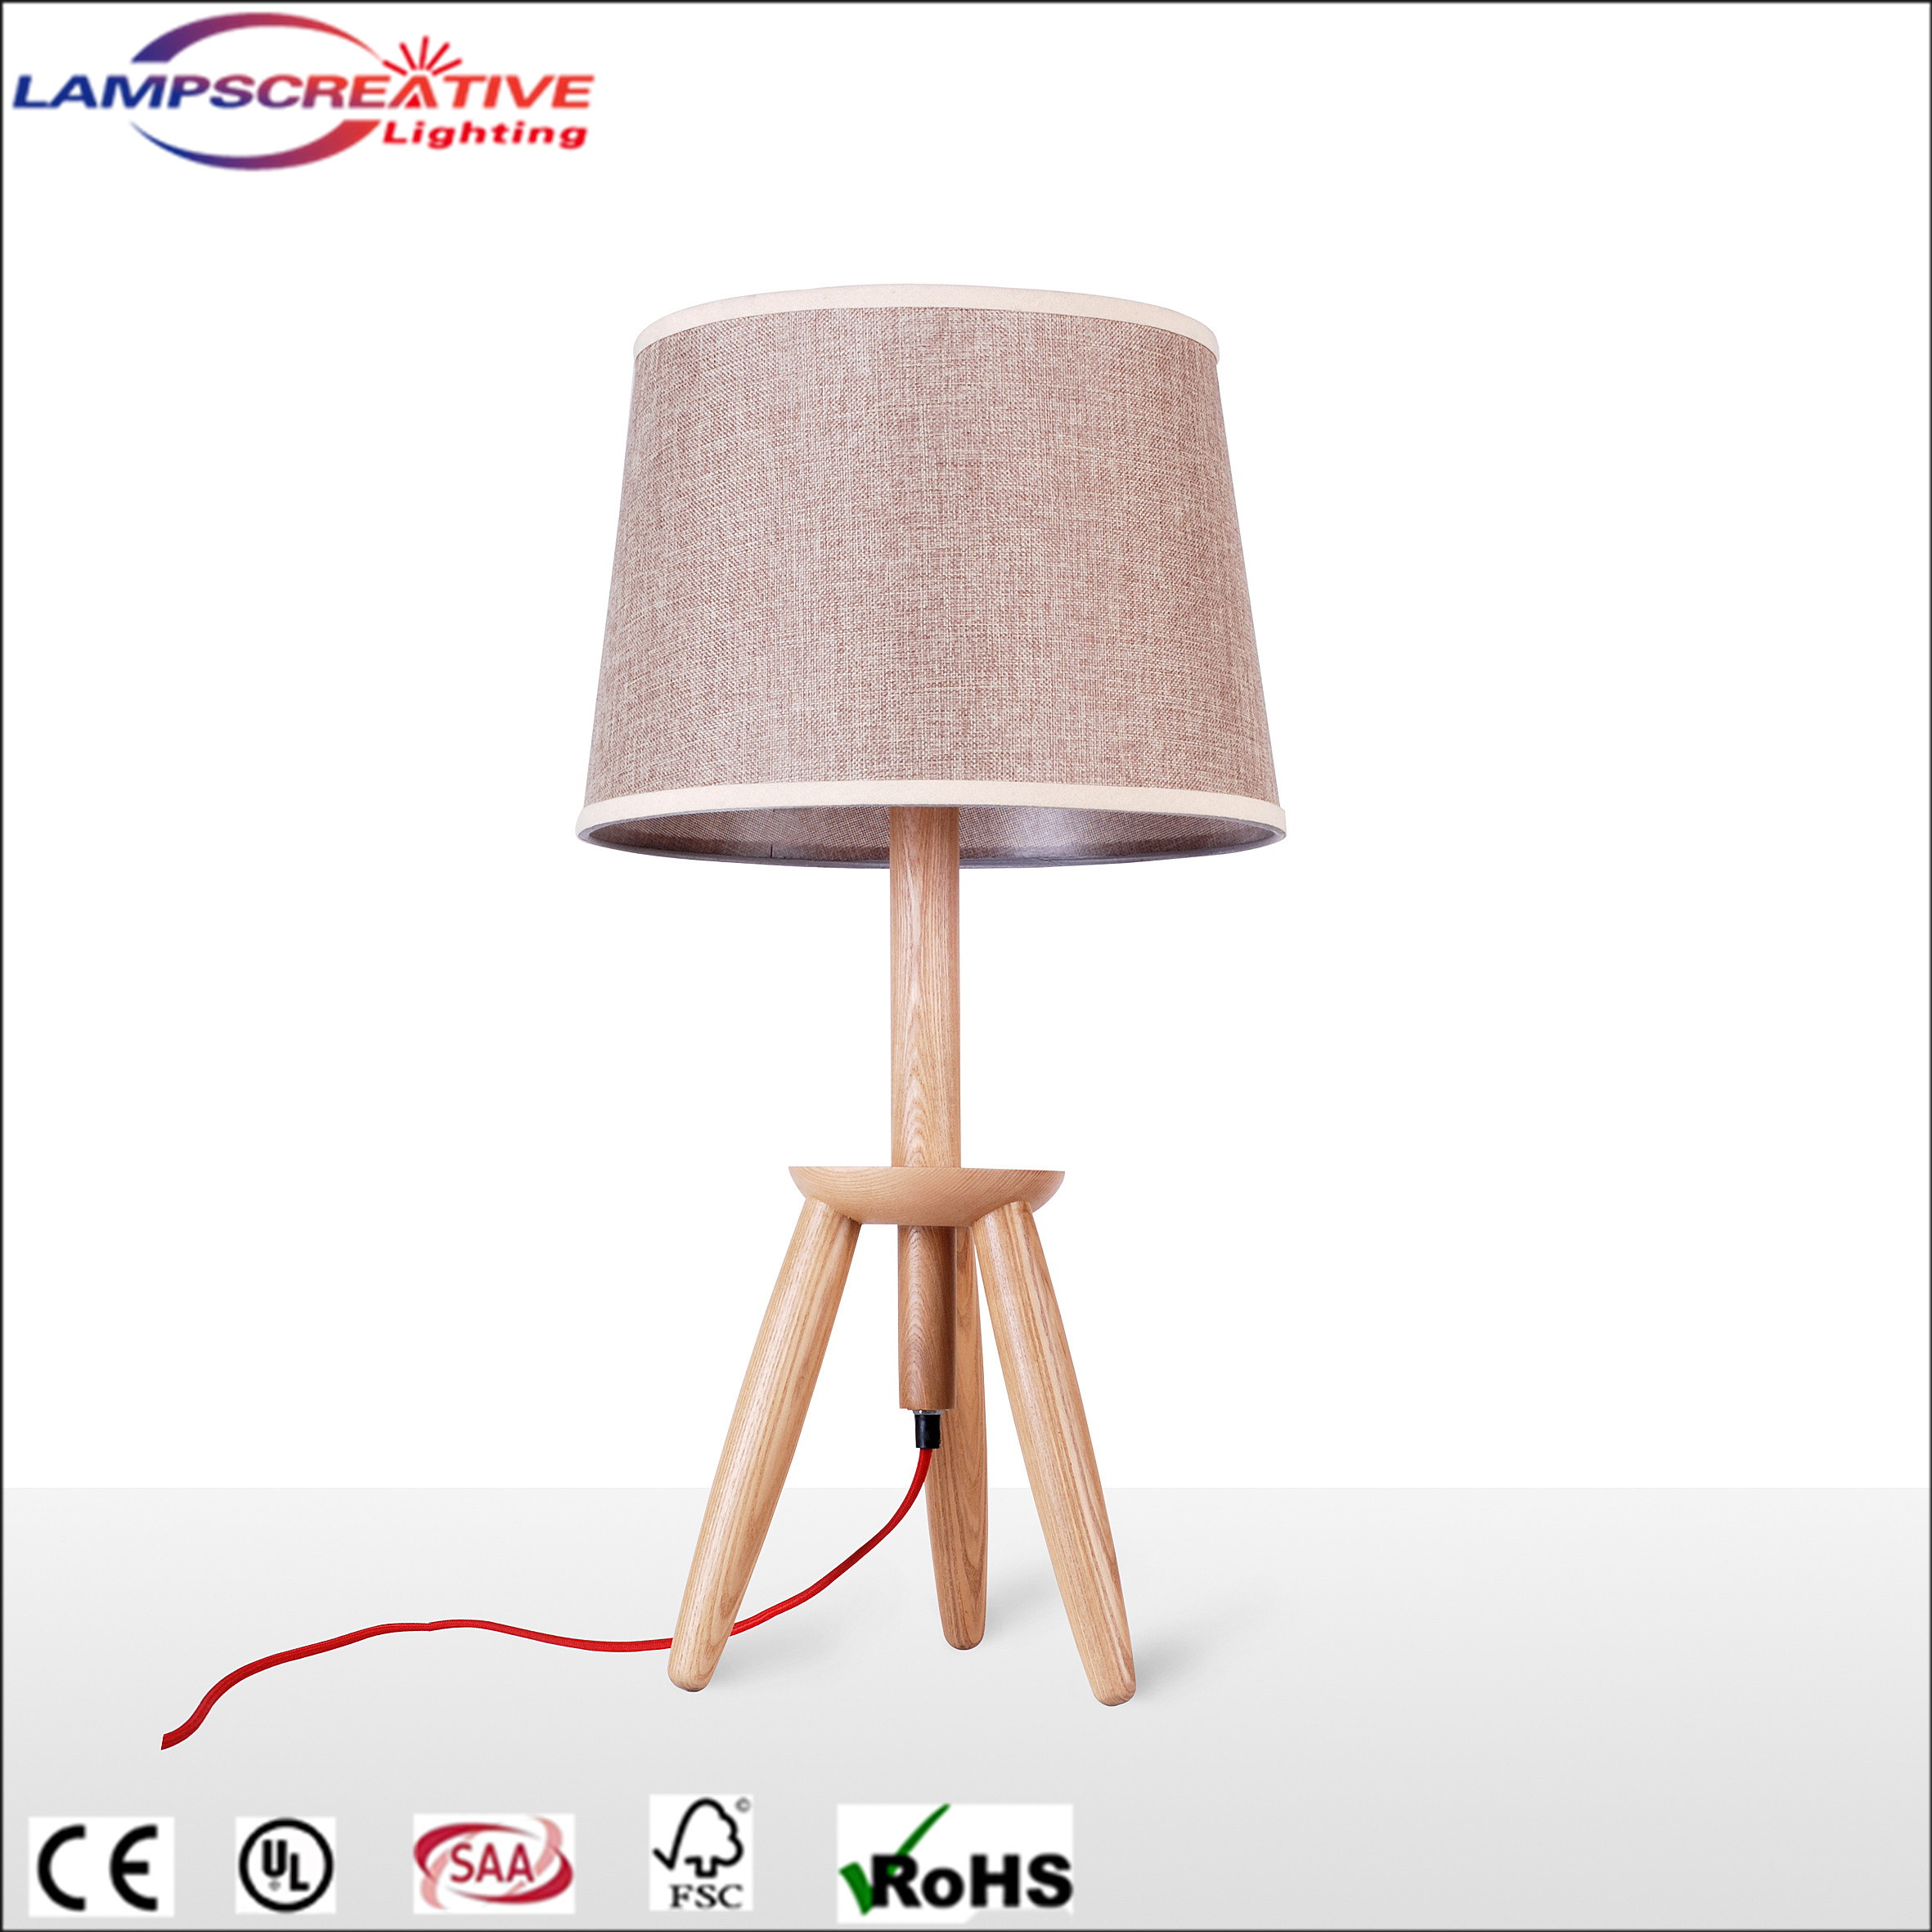 Wholesale wooden table lamp with fabric shade and wooden body LCT-DL